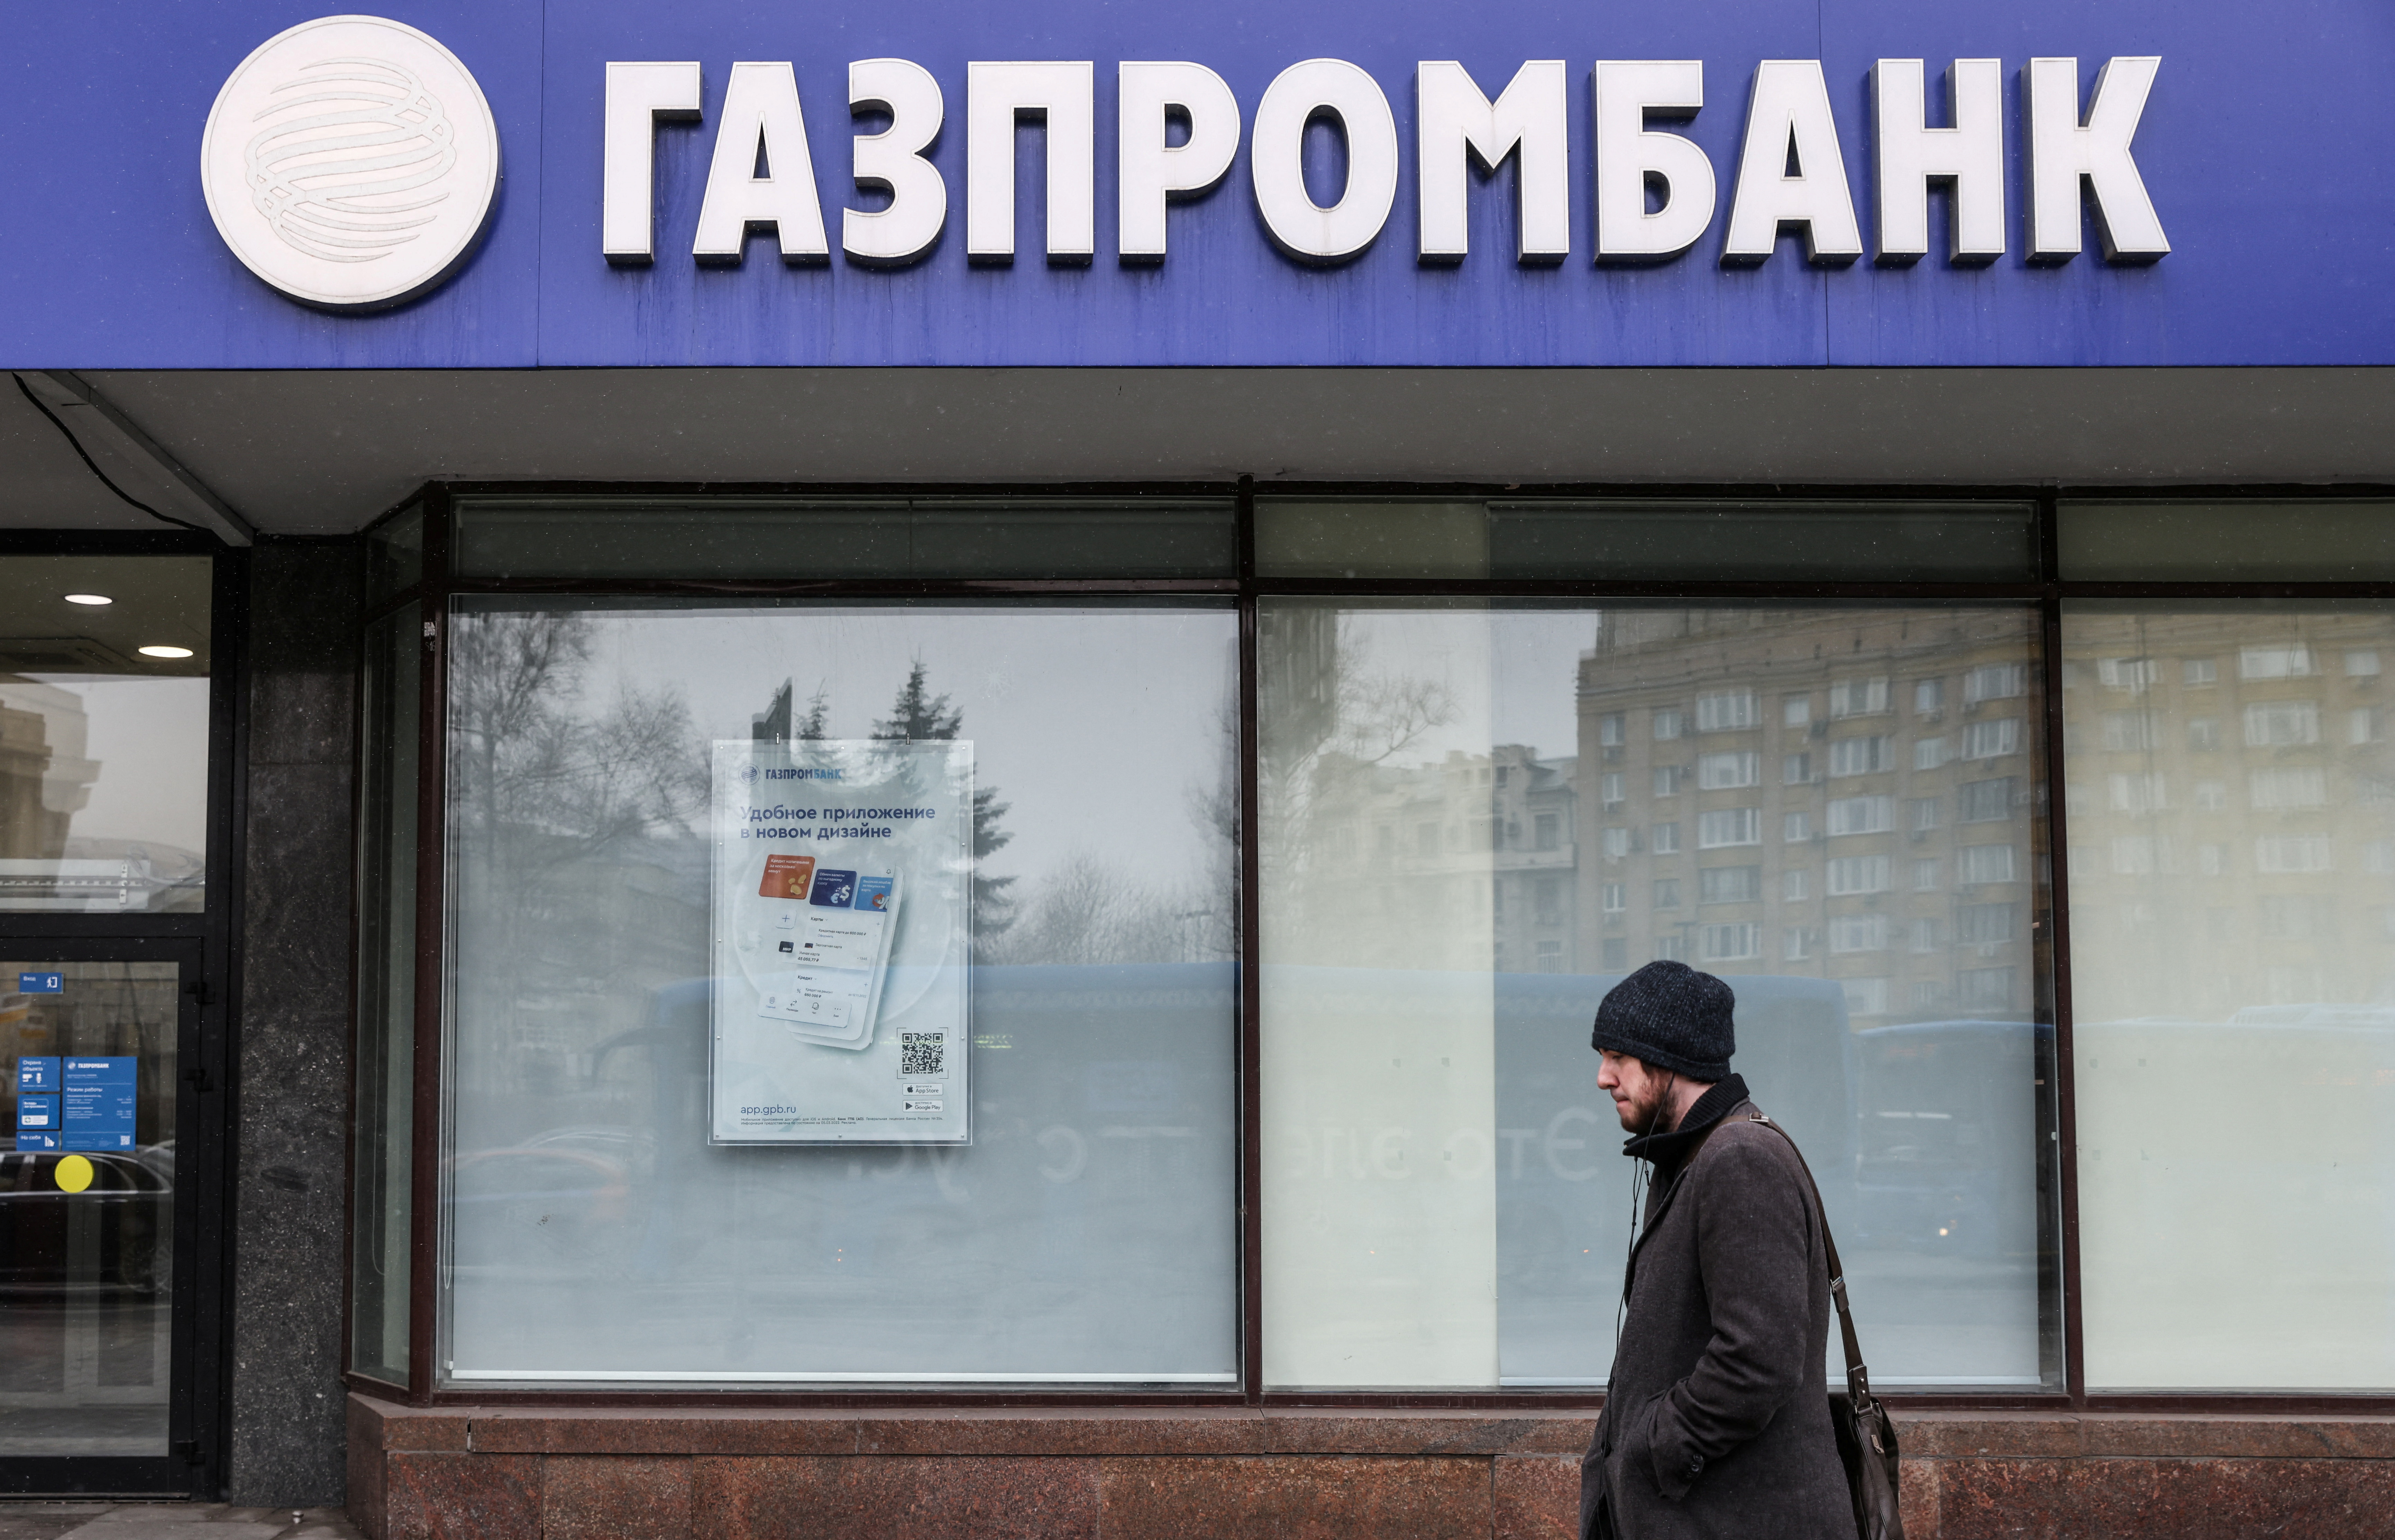 Russia's Gazprombank to set up convenient payments for gas in roubles -Tass